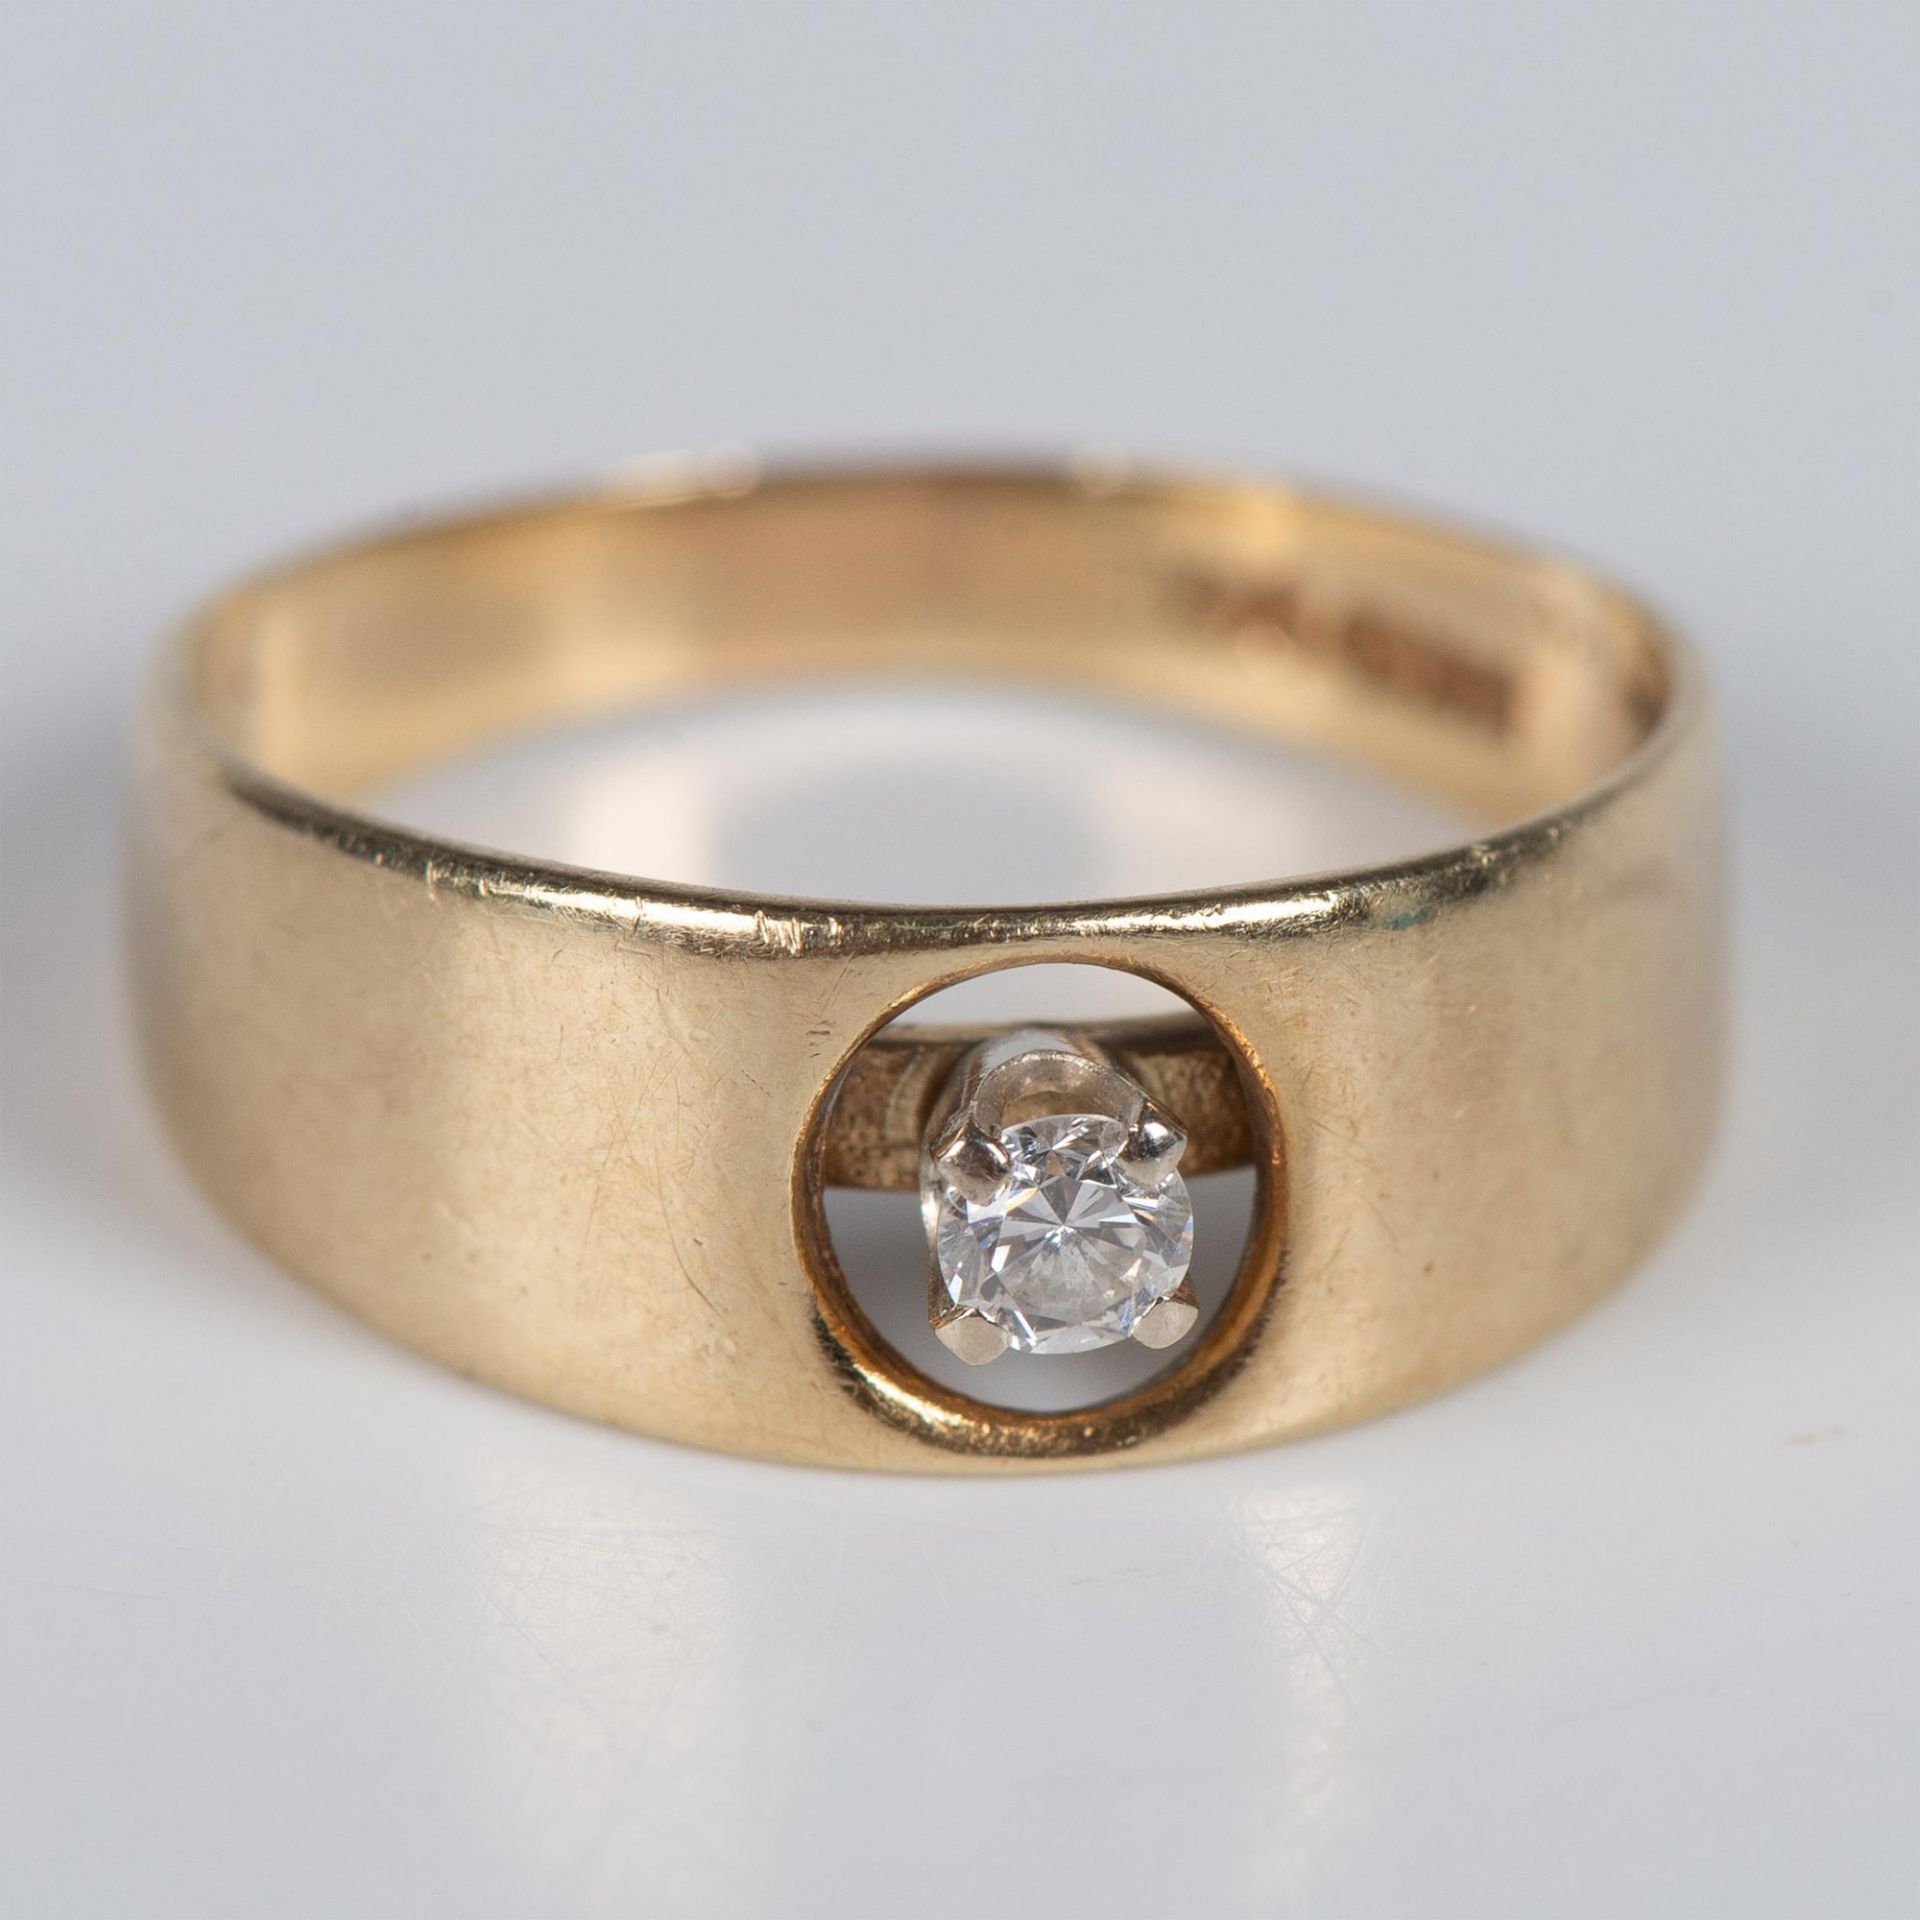 Classy Simple 14K Yellow Gold and Diamond Pinky Ring